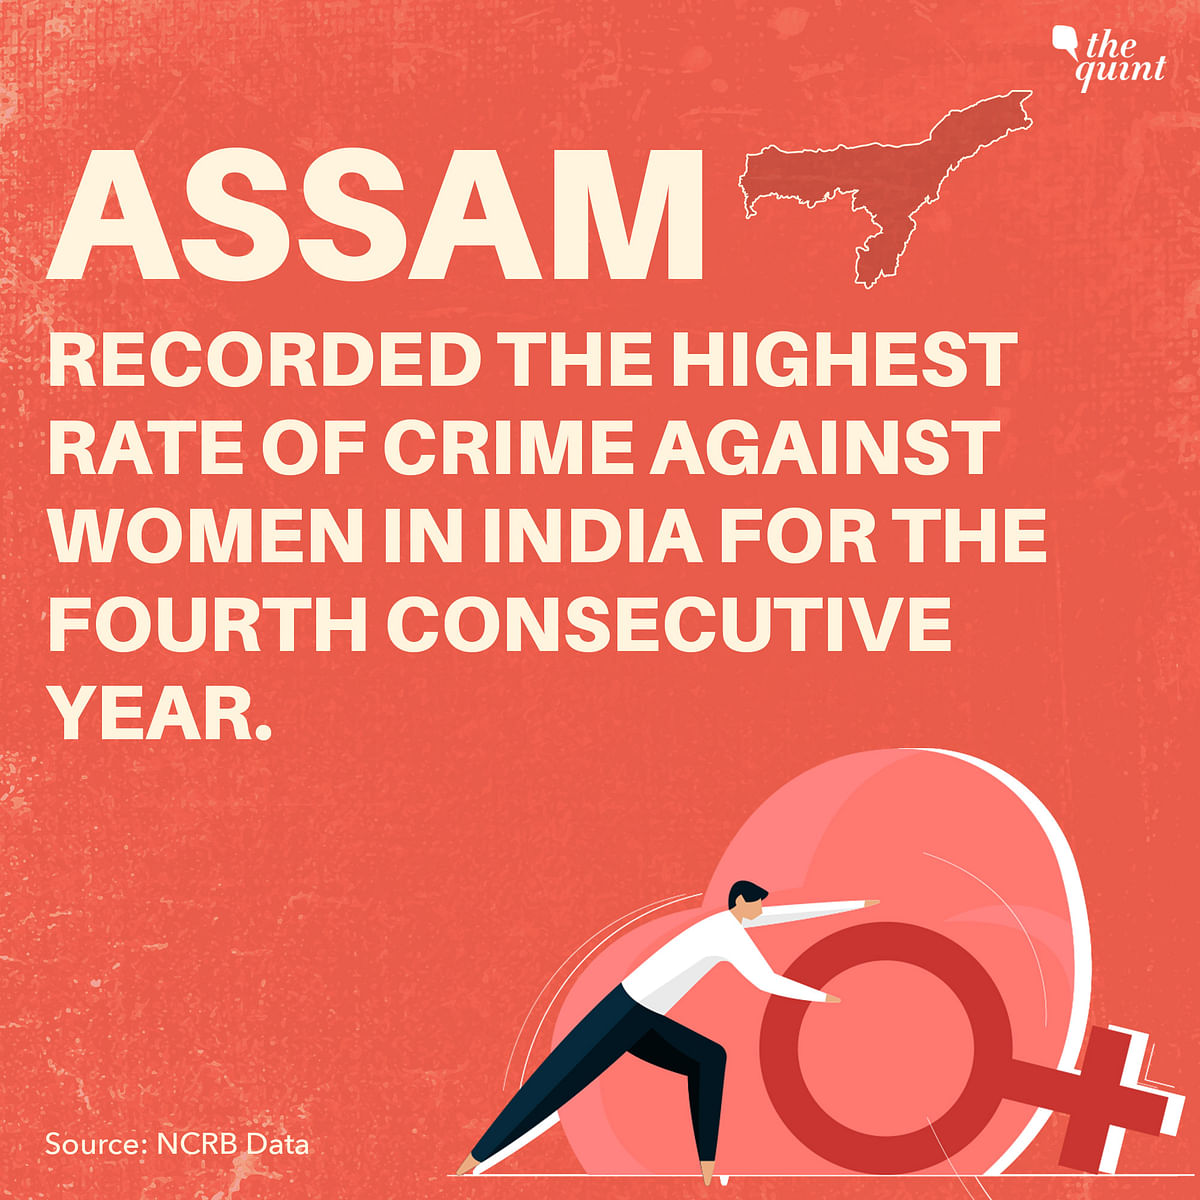 Assam's crime rate against women is 154.3 – which is almost thrice the national average of 56.5.